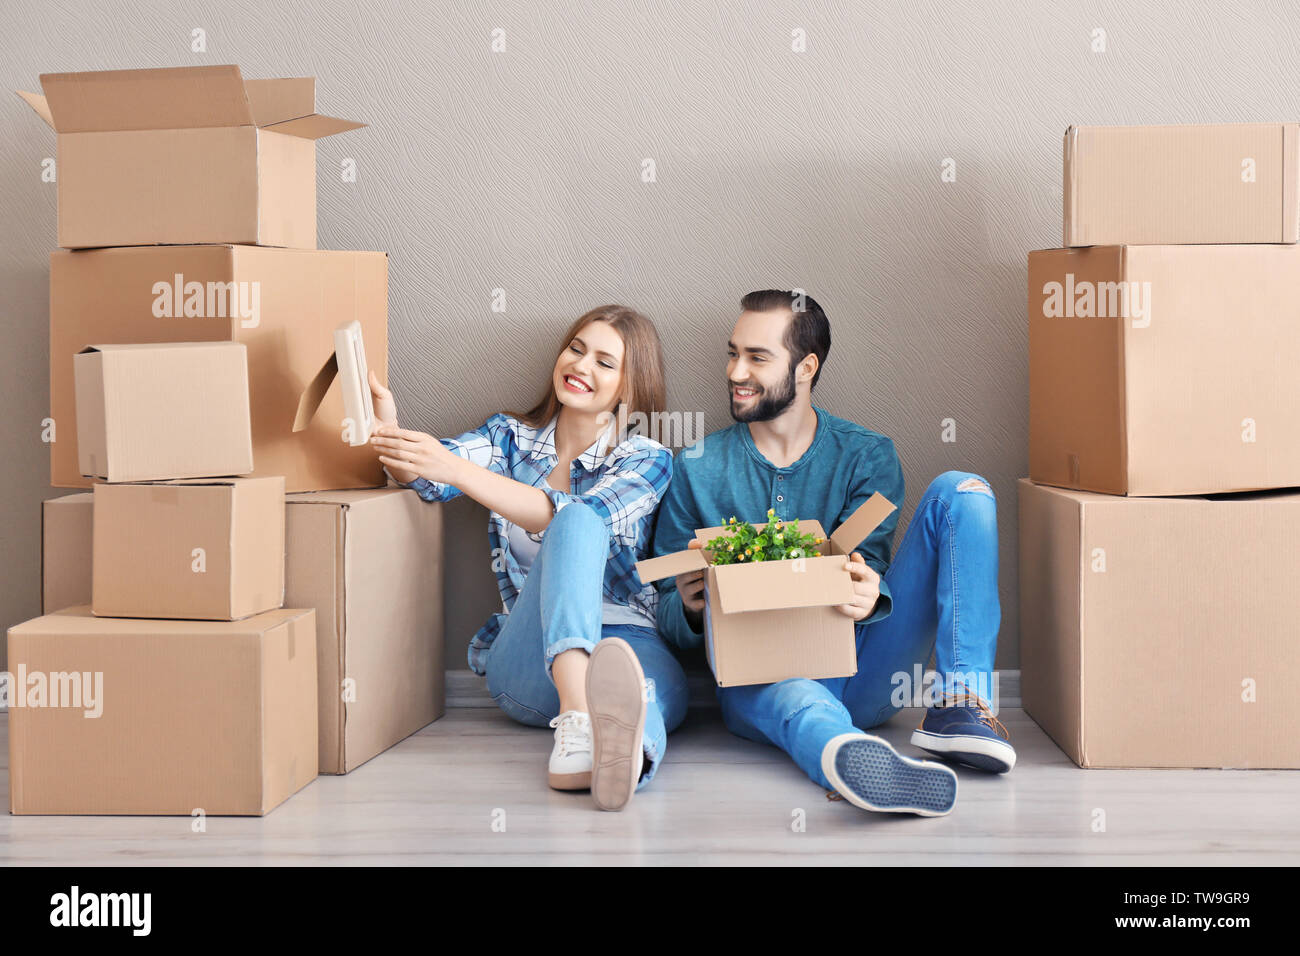 Young couple with moving boxes on floor in room Stock Photo